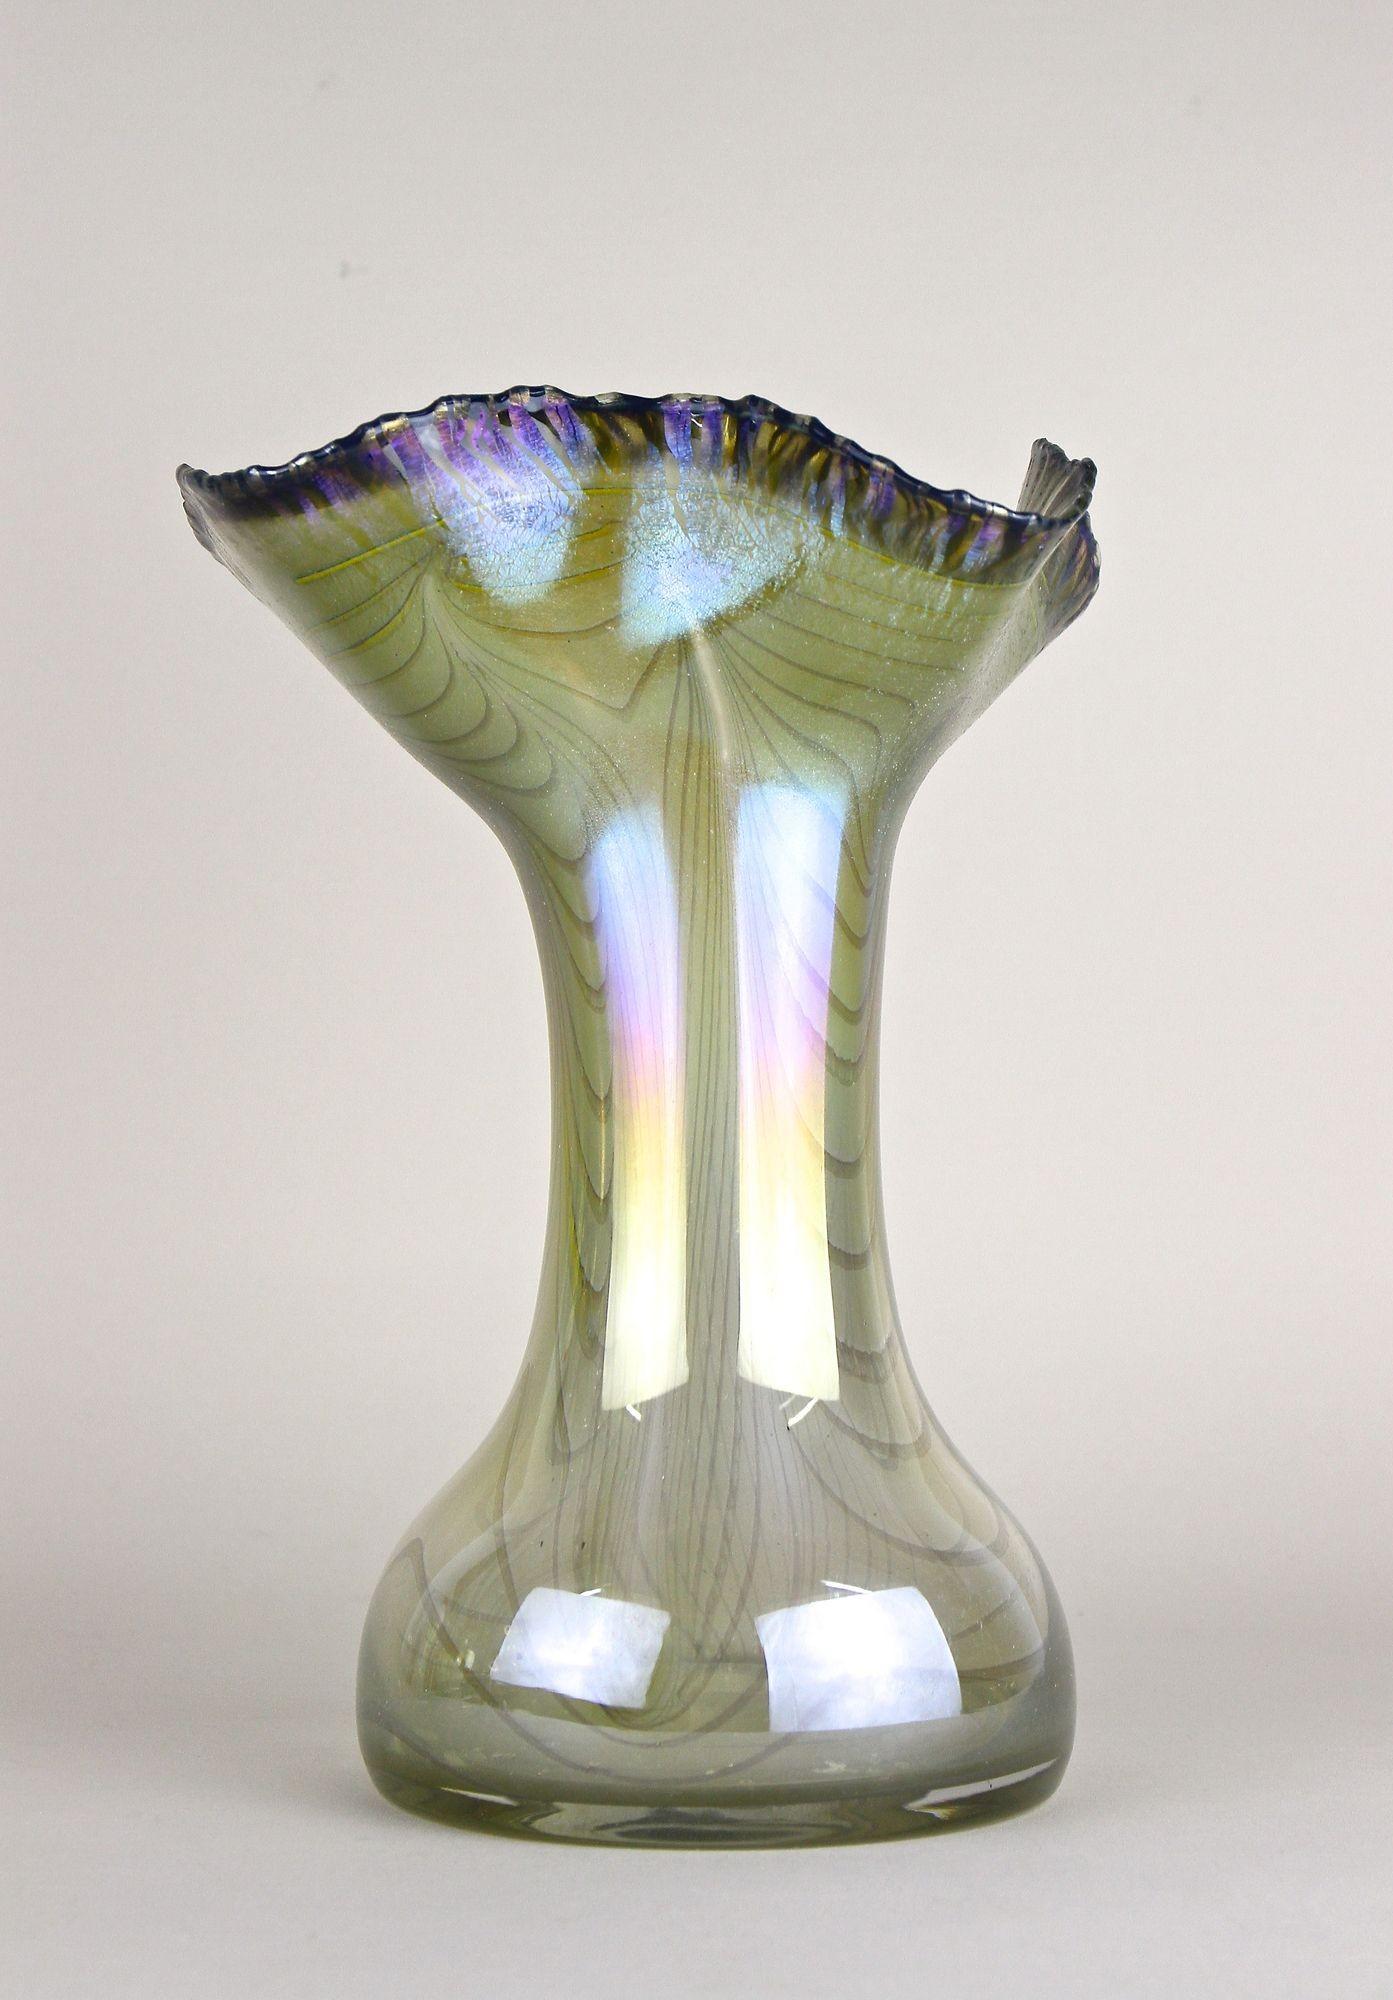 20th Century Iridescent Glass Vase by E. Eisch - Signed, Germany 1982 For Sale 4